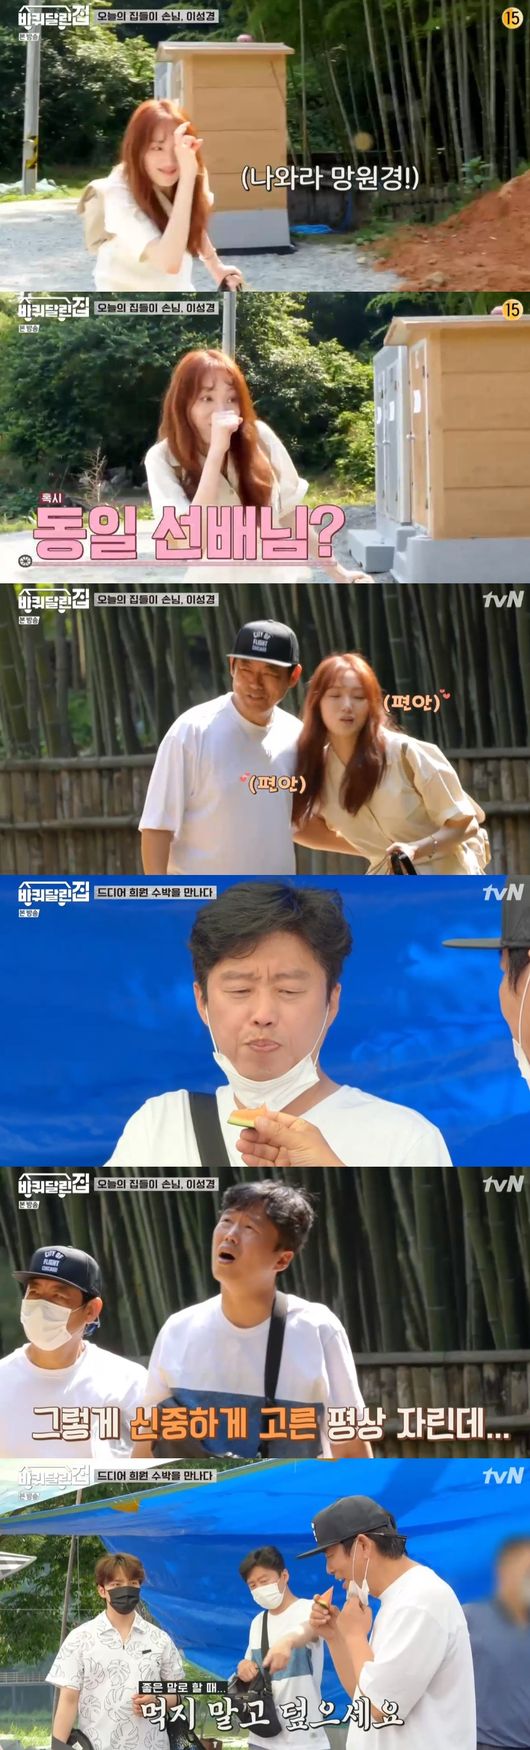 Lee Sung-kyung, who followed the Gong Hyo-jin barton in The German cockroach run-in house, burst the beagle properly; the presence itself provided healing.Lee Sung-kyung appeared as a guest in the TVN entertainment German cockroach run house broadcasted on the 9th.On the day of the last day of Jeju, Gong Hyo-jin asked, Have you ever lived in a tent while camping?I slept like that in Pony, he said, so I was relieved not to worry about the members who were worried about sleeping in the tent.The next day, I greeted the morning in a tent freshly. Kim Hee-won, who finally woke up, said, Good.I will be cool if I open both sides of the mosquito net in the summer, he said. I do not want to go out in winter because I like it in winter.After the breakfast preparation, Kim Hee-won was worried about the morning of Gong Hyo-jin; he brought rice cakes for food, and Gong Hyo-jin was worried that the rice cake would have rested.At this time, Kim Hee-won wrote a song selection by Sung Dong-il, Hyo Jin-a you are dead.In the movie Memories of Murder, this song was played and something happened. Sung Dong-il was embarrassed and laughed.Jin Goo, who prepared morning ramen for the members, and Gong Hyo-jin, who was looking at Jin Goo, was surprised that Jin Goo has gray hair.Kim Hee-won said, Its over now, this is hard to start, it ends in two months when it starts, and Jean Goo said, There was no yesterday.Im sure its a joke that I dont lose.The four men had truly healed, enjoying the green phytoncide, and the trees were still in the clear clearing, and the trees were still in the clearing.Sung Dong-il said, Hyojin really goes well with this nature, I think I will shoot a gun well.After Gong Hyo-jin returned, he made a third trip plan. Sung Dong-il said, The bamboo is cool from the old days, so where we go is probably cool.I am going to rest anyway. The members were excited about the members, but the members who were tired of the heat did not easily believe it.To gain the confidence of the members, Sung Dong-il found the most heat-avoidable position in the bamboo forest, and placed the flat in the most suitable position.The house-goers were Lee Sung-kyung, who appeared with a full gift.Lee Sung-kyung appeared in a cute gesture and as soon as he saw Sung Dong-il, he was senior and appeared in a juicy pose.Lee Sung-kyung took out a lot of gifts he had prepared and said, I came because I wanted to give it quickly, and Kim Hee-won delivered a ice machine he would like.He said he liked to take pictures, and he took out the film camera, saying, Its so beautiful, its real. Lee Sung-kyung was delighted to take pictures.Then I looked around the Camping car.Lee Sung-kyung said, It is smaller than when I watch on TV. He watched Camping Car with the introduction of Jin Goo, and Sung Dong-il looked at the two and said, They seem to be shooting coffee commercials.The members prepared pork belly with a bamboo tree licensed in bamboo forest.Jin Goo and Lee Sung-kyung expected to be completely delicious as they completed the bamboo shoots with fantastic breathing.Lee Sung-kyung has found work to do diligently.Jin Goo said, The guest should rest. Lee Sung-kyung said, It is fun to do this.It was Lee Sung-kyung who gave healing just by being.German cockroach broadcast screen capture